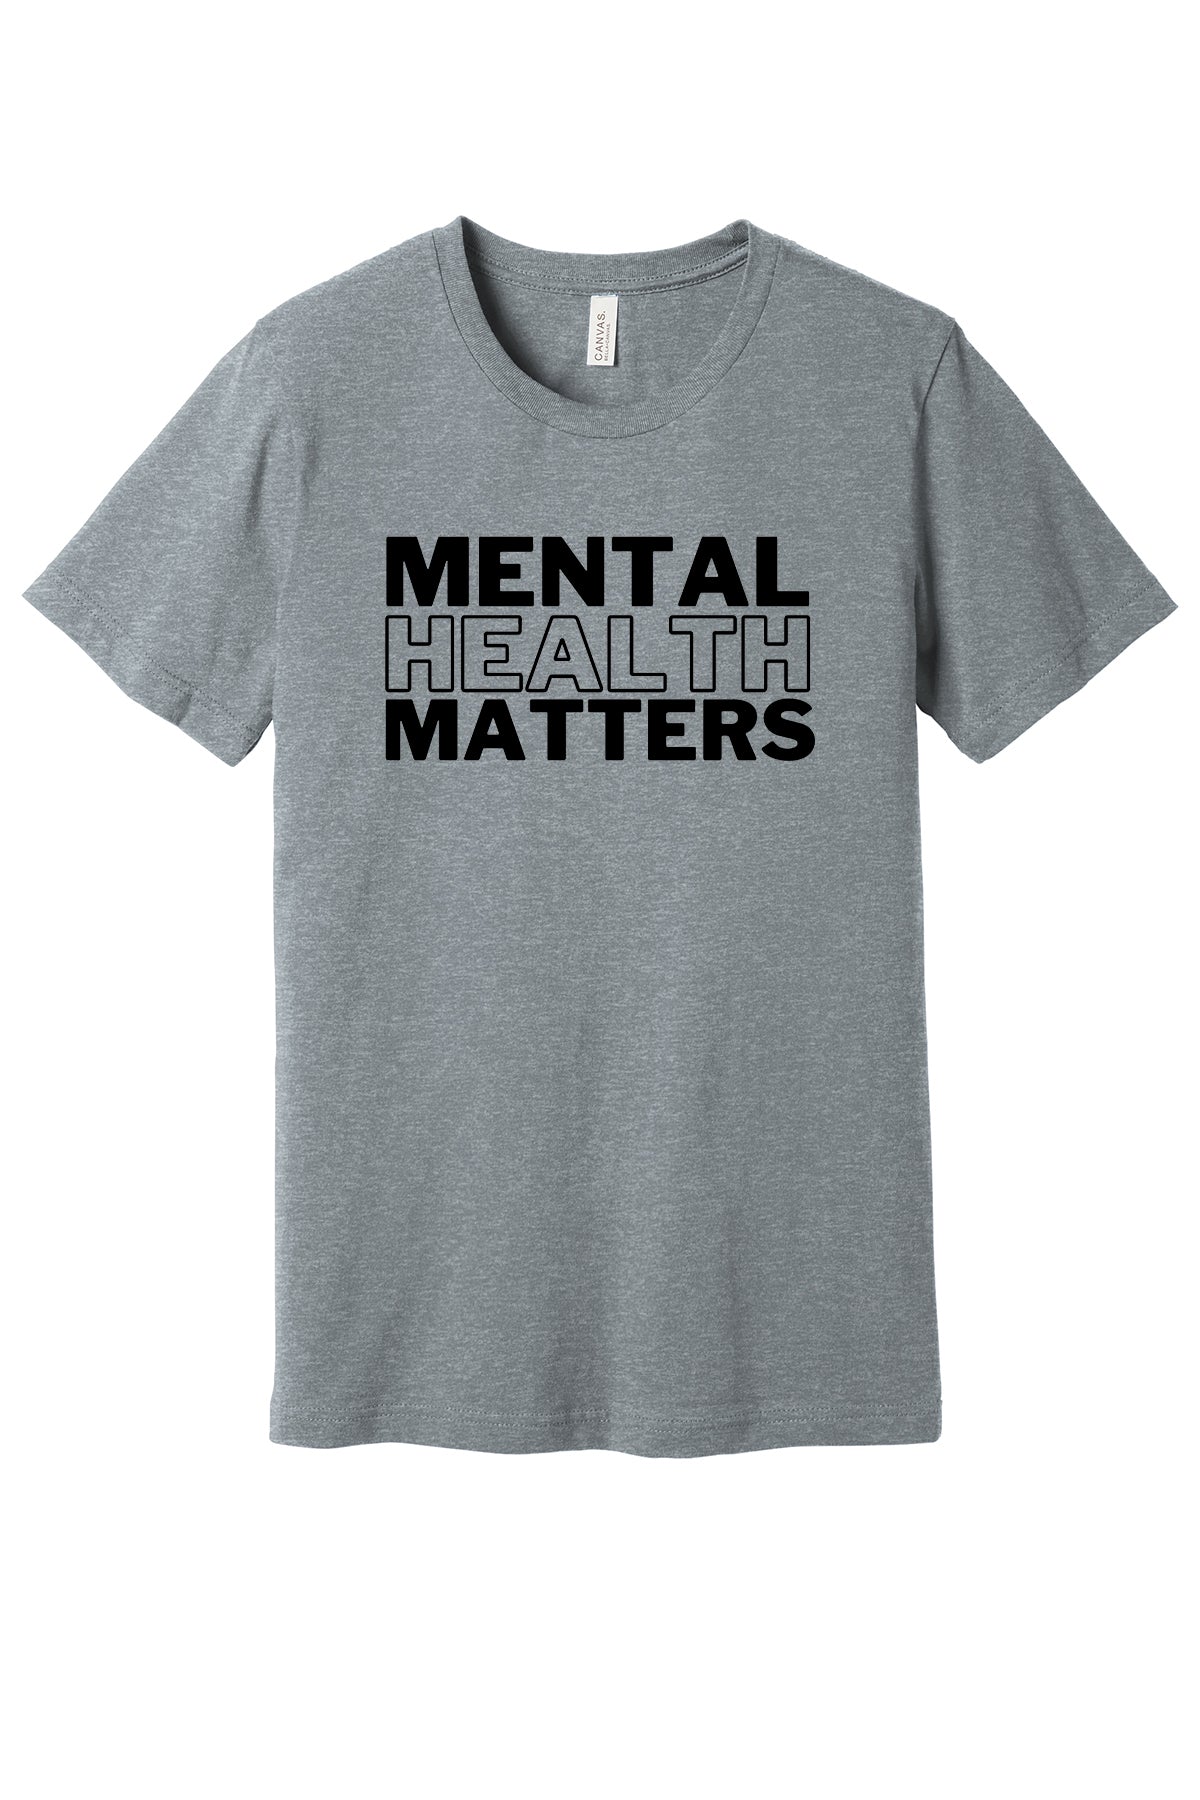 'Mental Health Matters' Block Printed Graphic Tee: Prep Obsessed x Weather With Lauren (Ships in 2-3 Weeks)